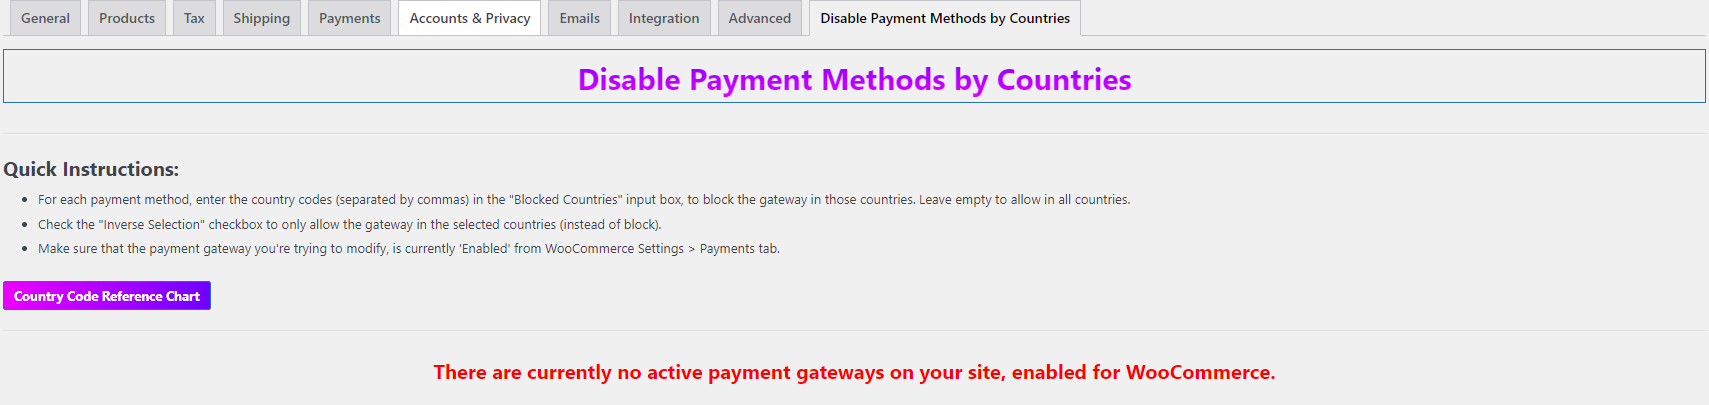 Payment Methods Not Enabled For WooCommerce Error Message